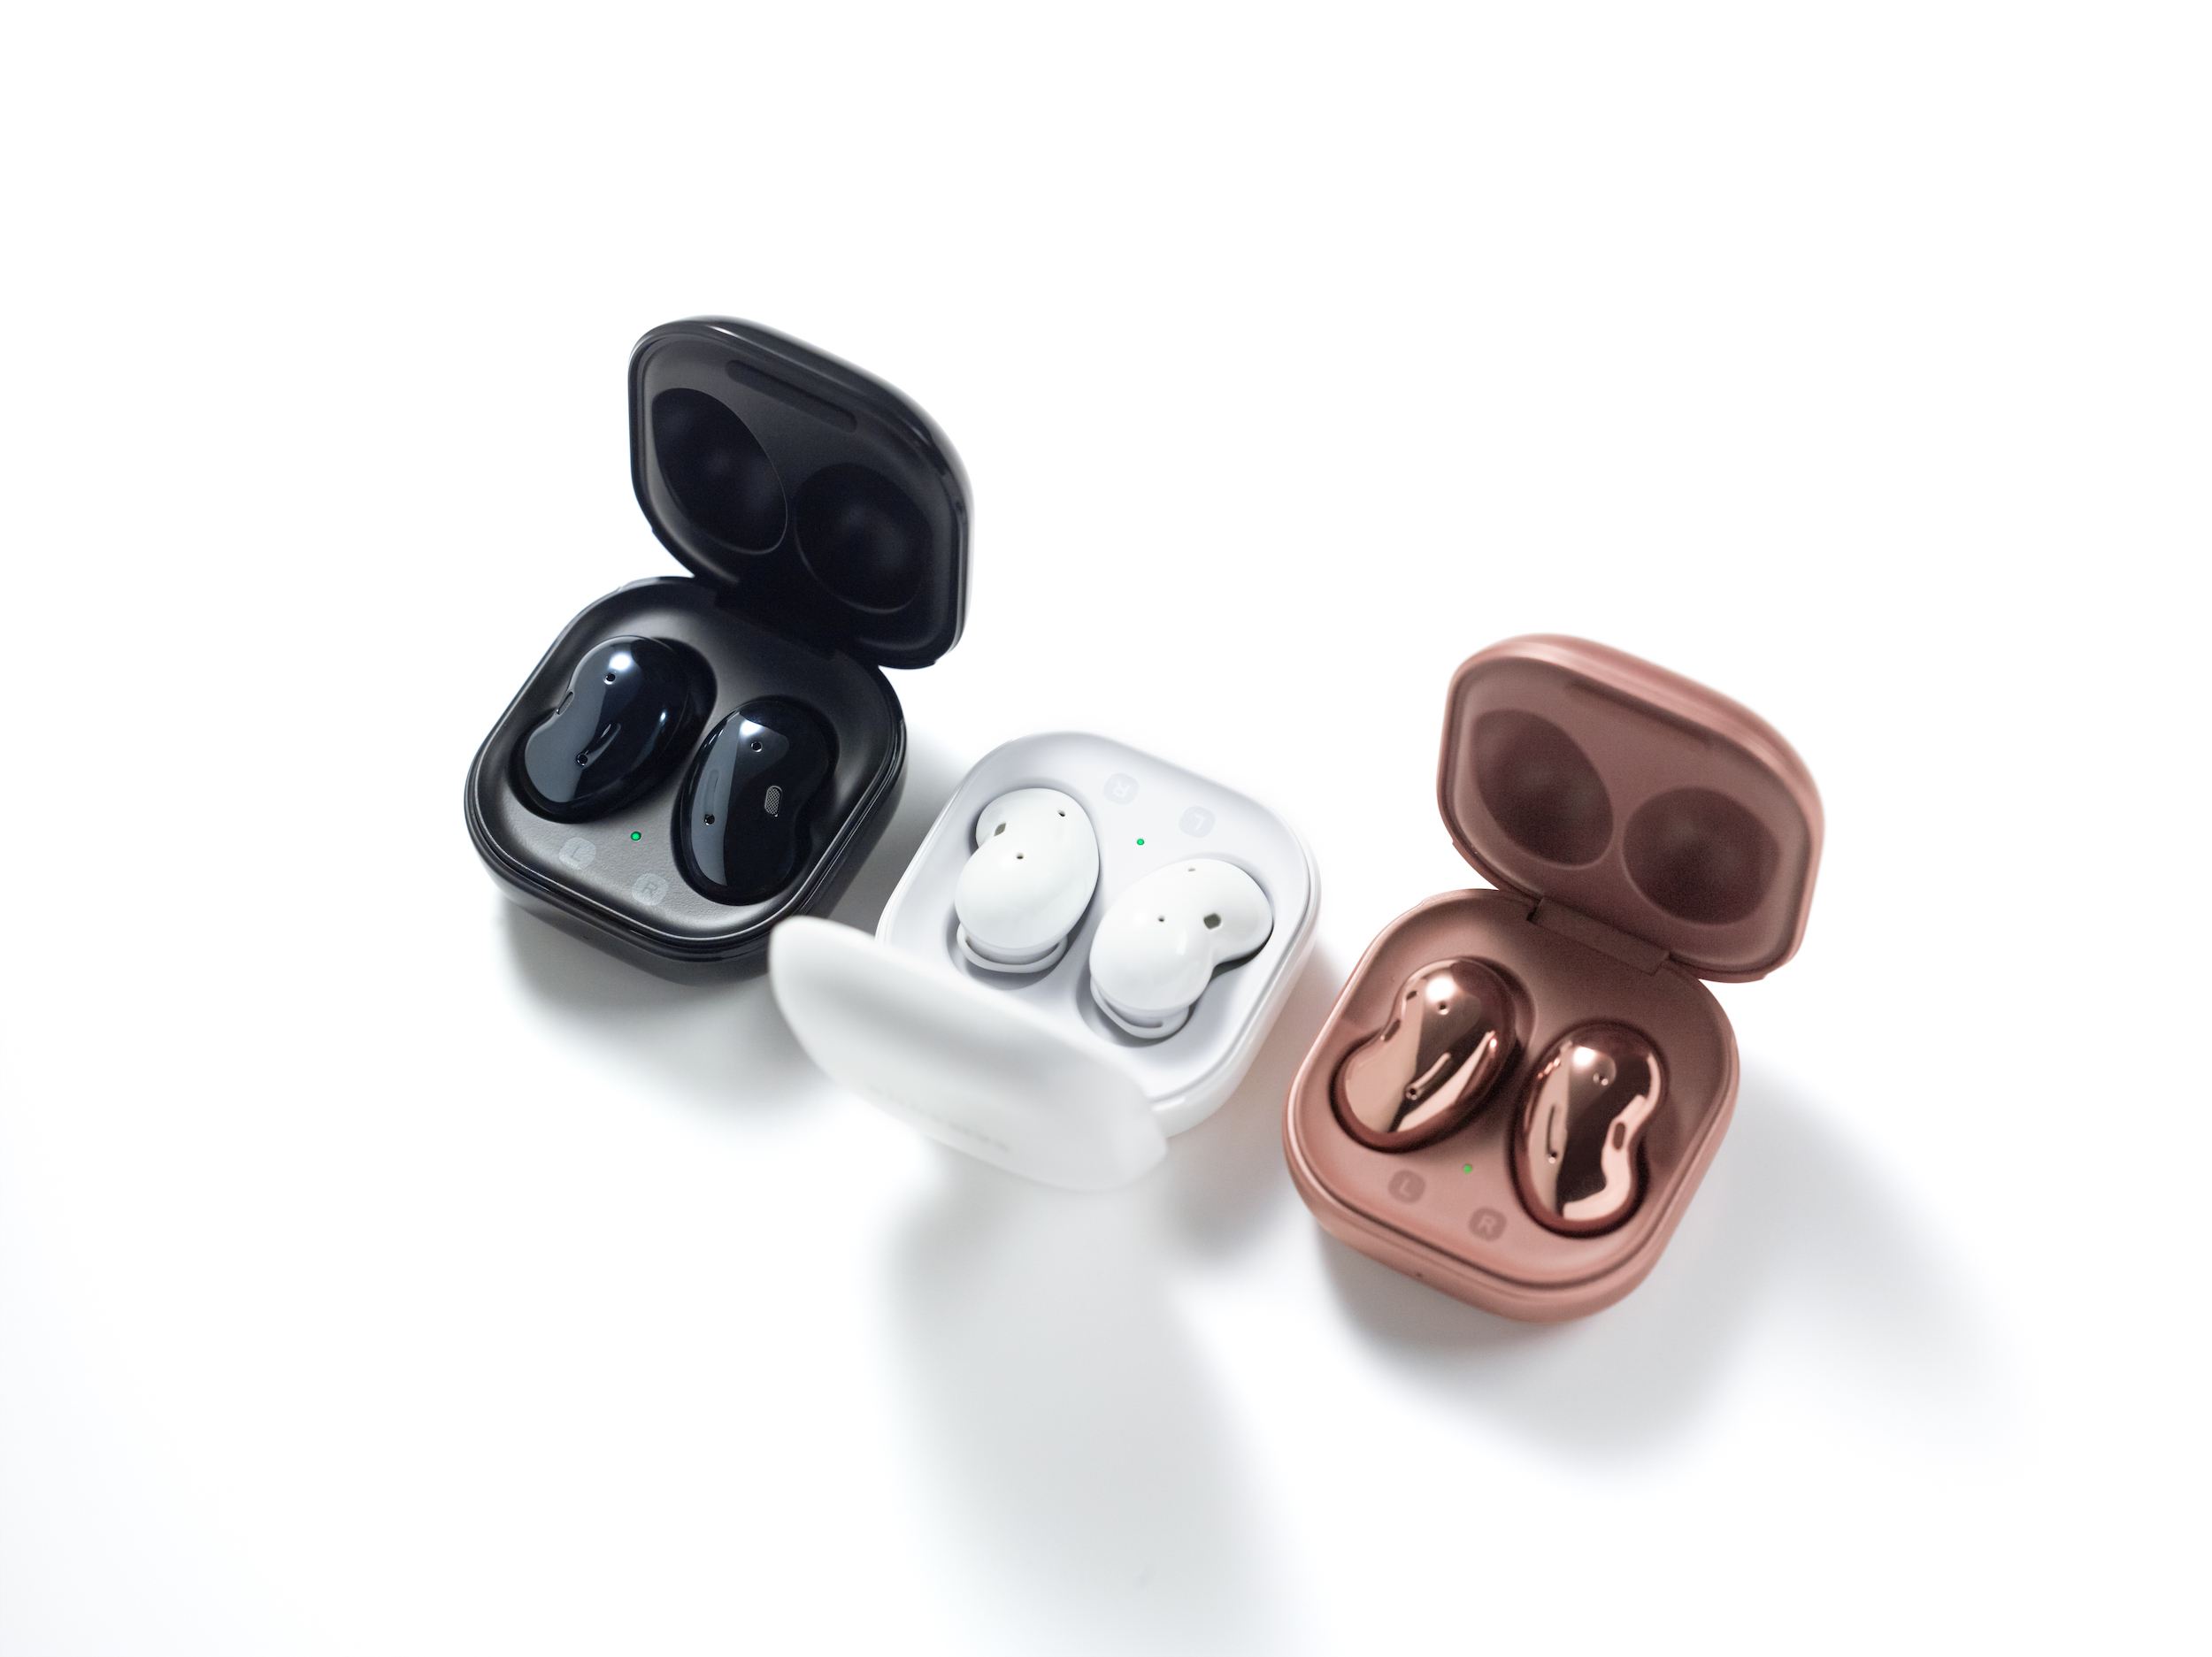 Samsung's “beans” earbuds are here, and they're called the Galaxy Buds Live